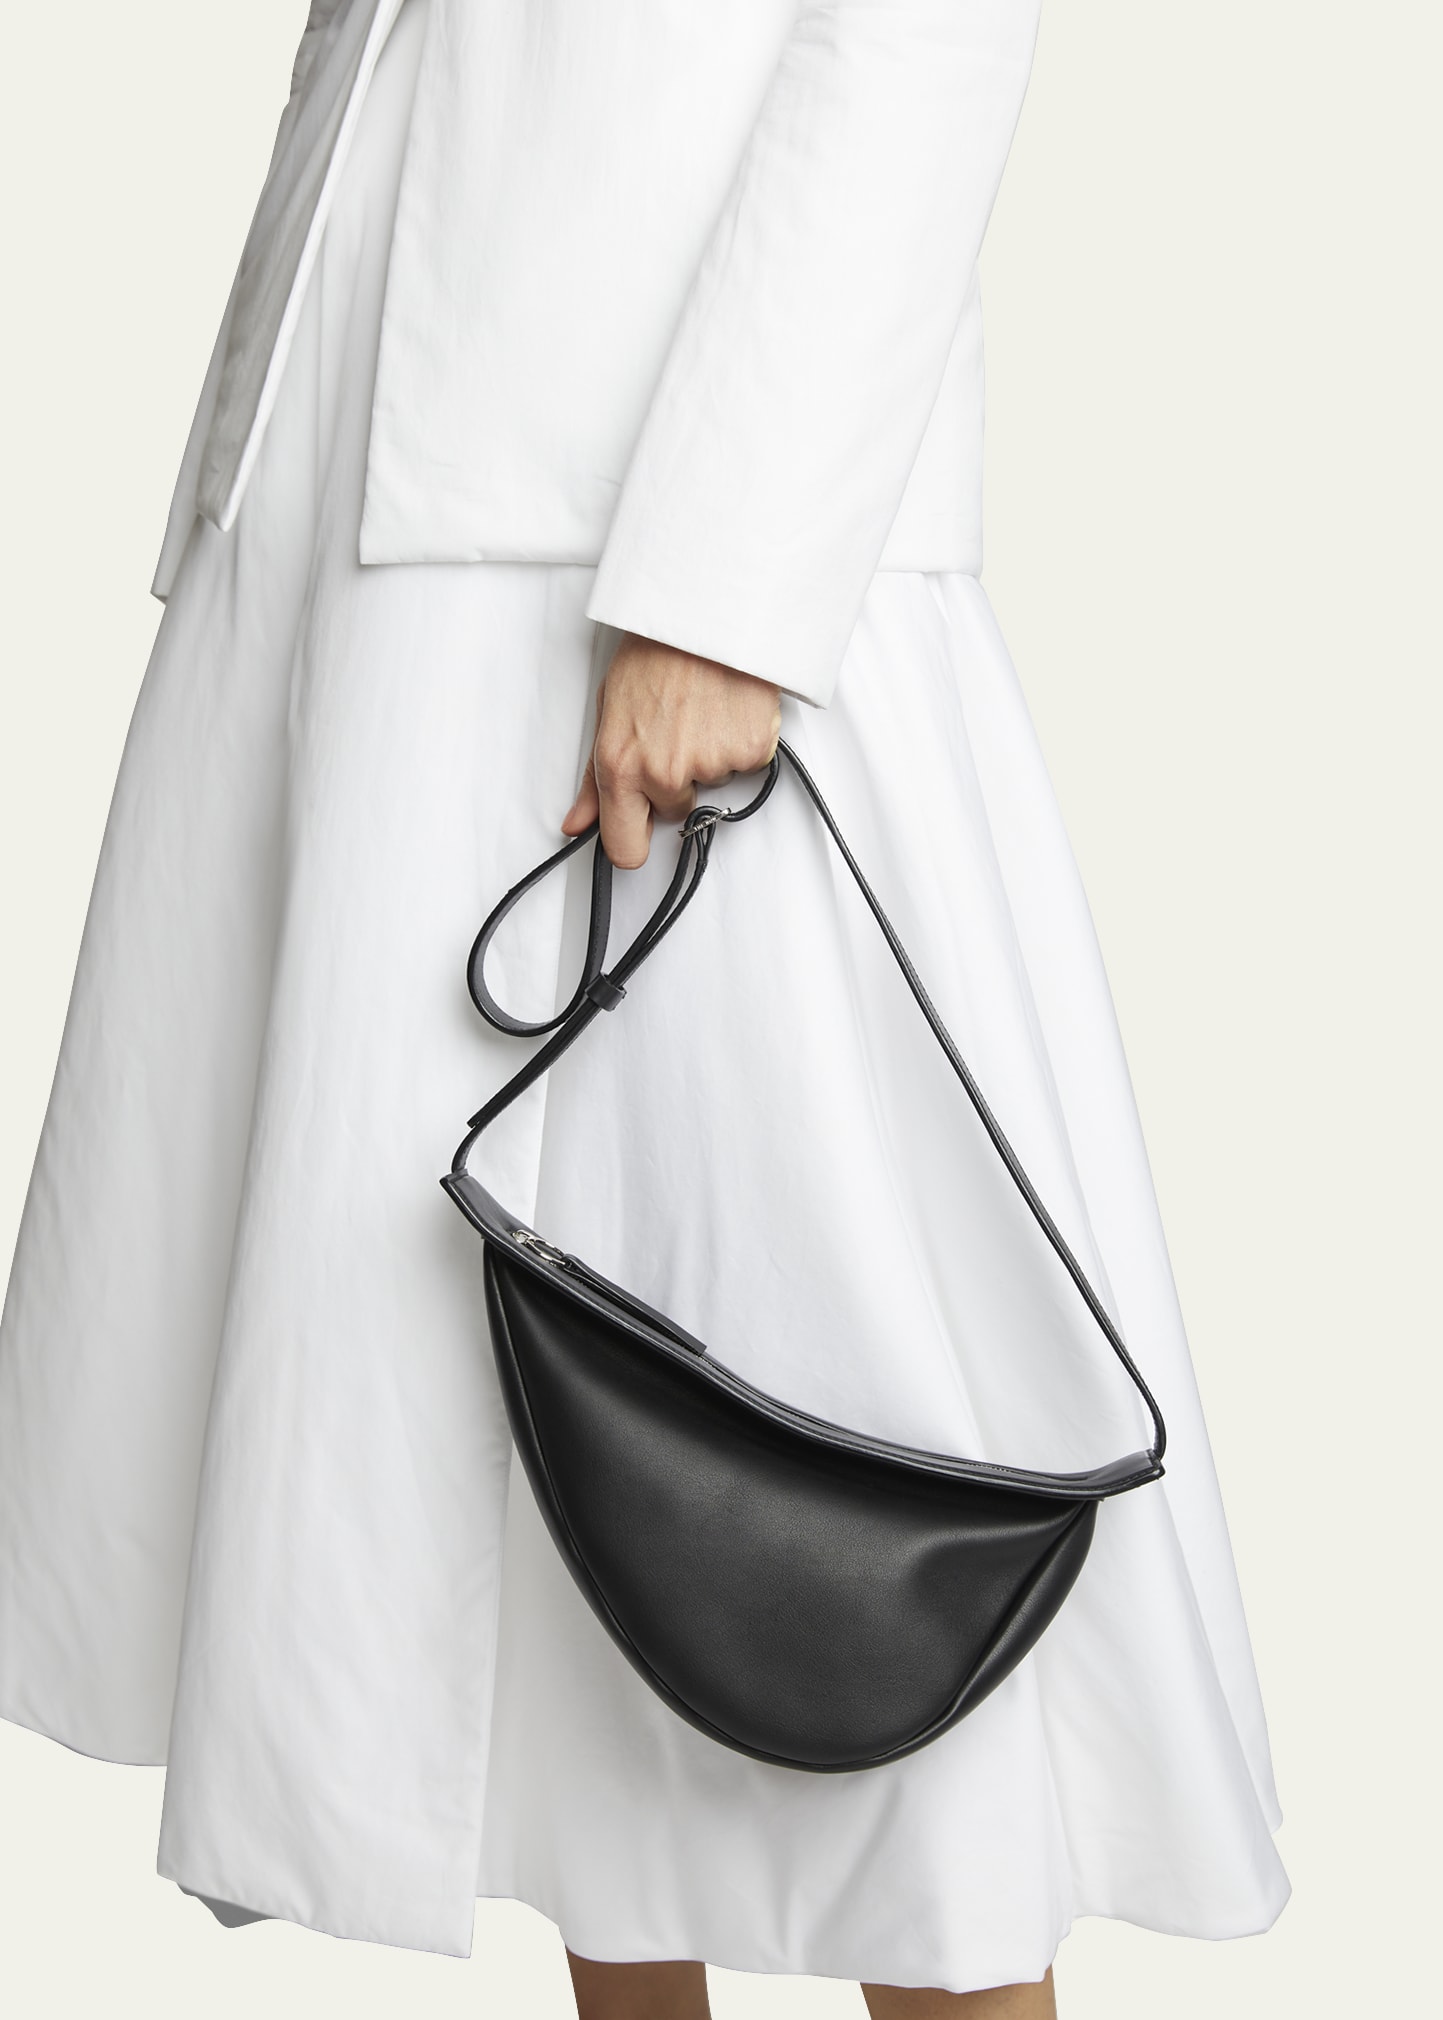 The Row Small Slouchy Banana Bag in Black - ShopStyle